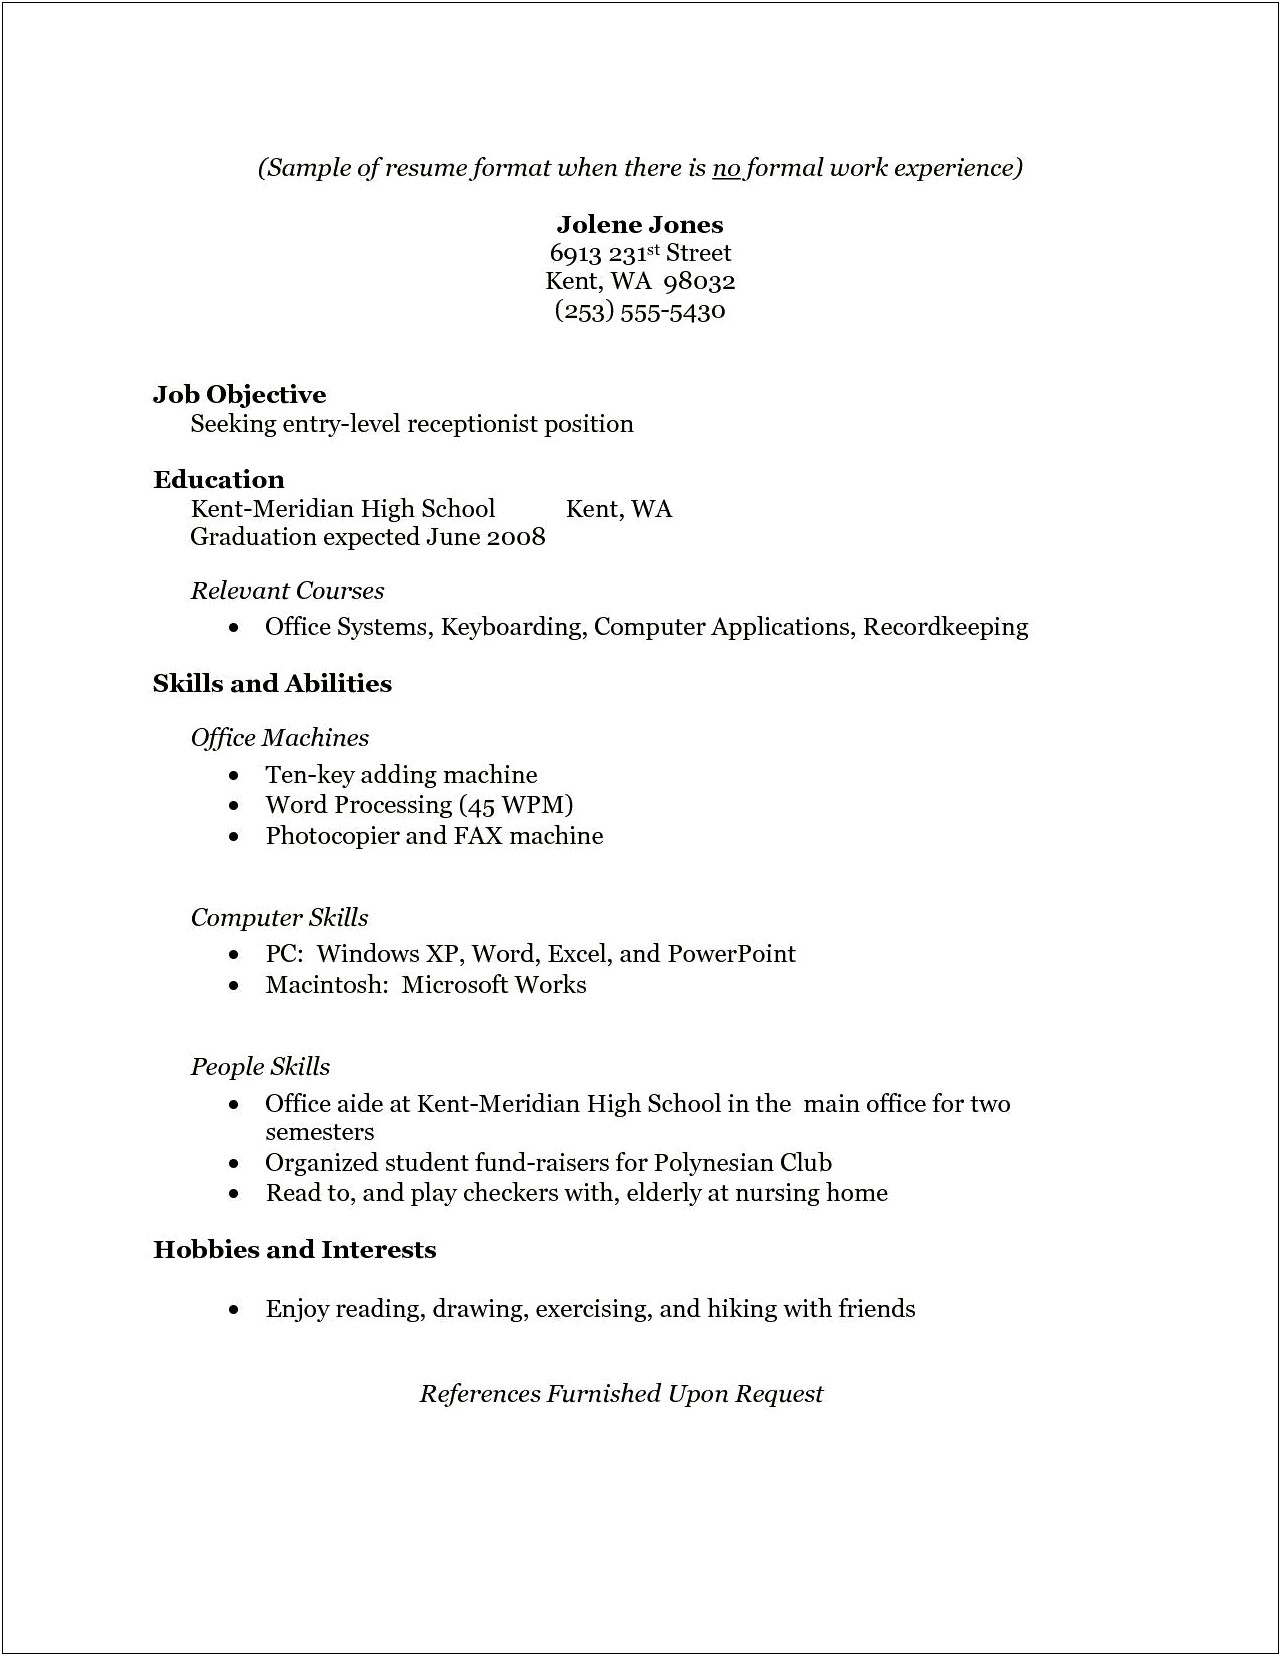 Resume Template For People With No Work Experience